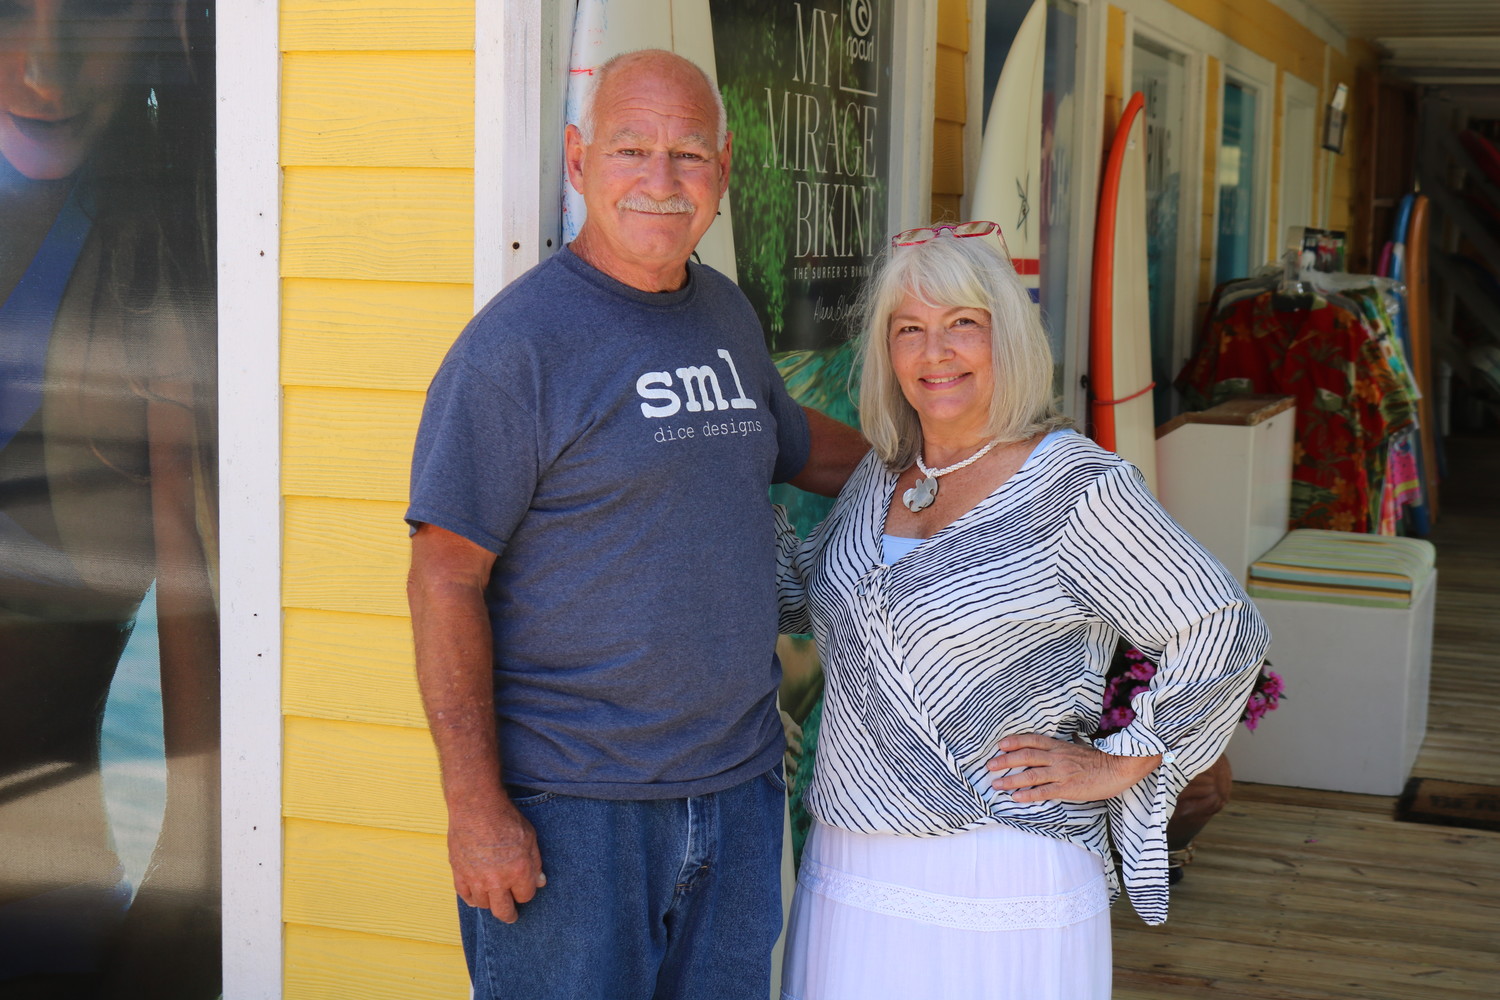 Fort George Surf Shop owner Jim Rodgers with his wife Debi